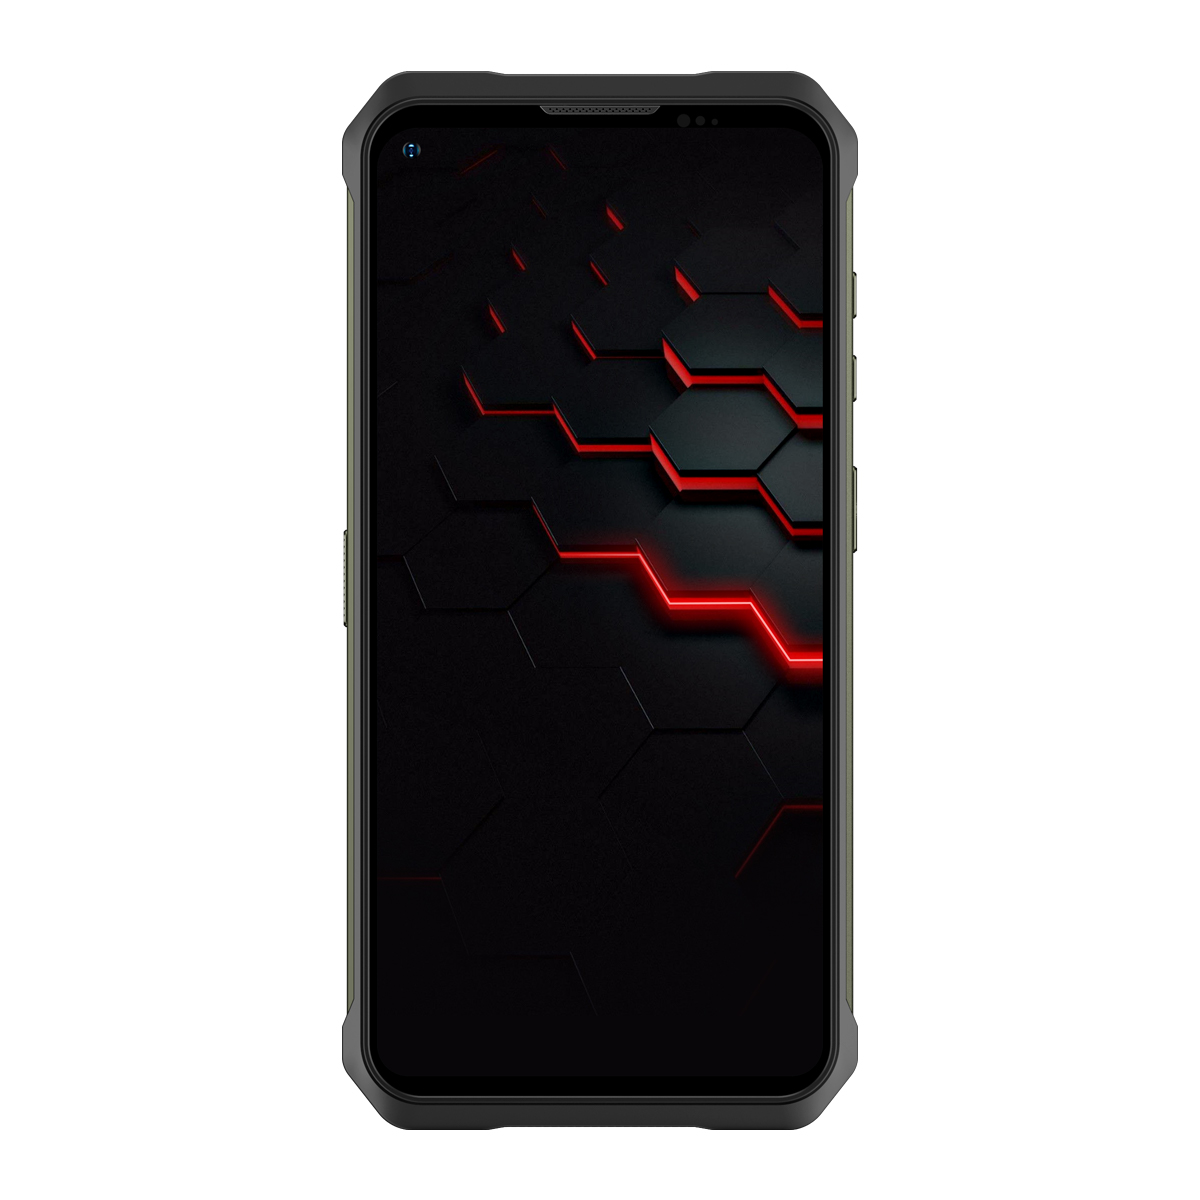 Find DOOGEE V10 Global Bands Dual 5G IP68 IP69K 8GB 128GB Dimensity 700 NFC Android 11 8500mAh 6 39 inch 48MP AI Triple Camera Octa Core Rugged Smartphone for Sale on Gipsybee.com with cryptocurrencies